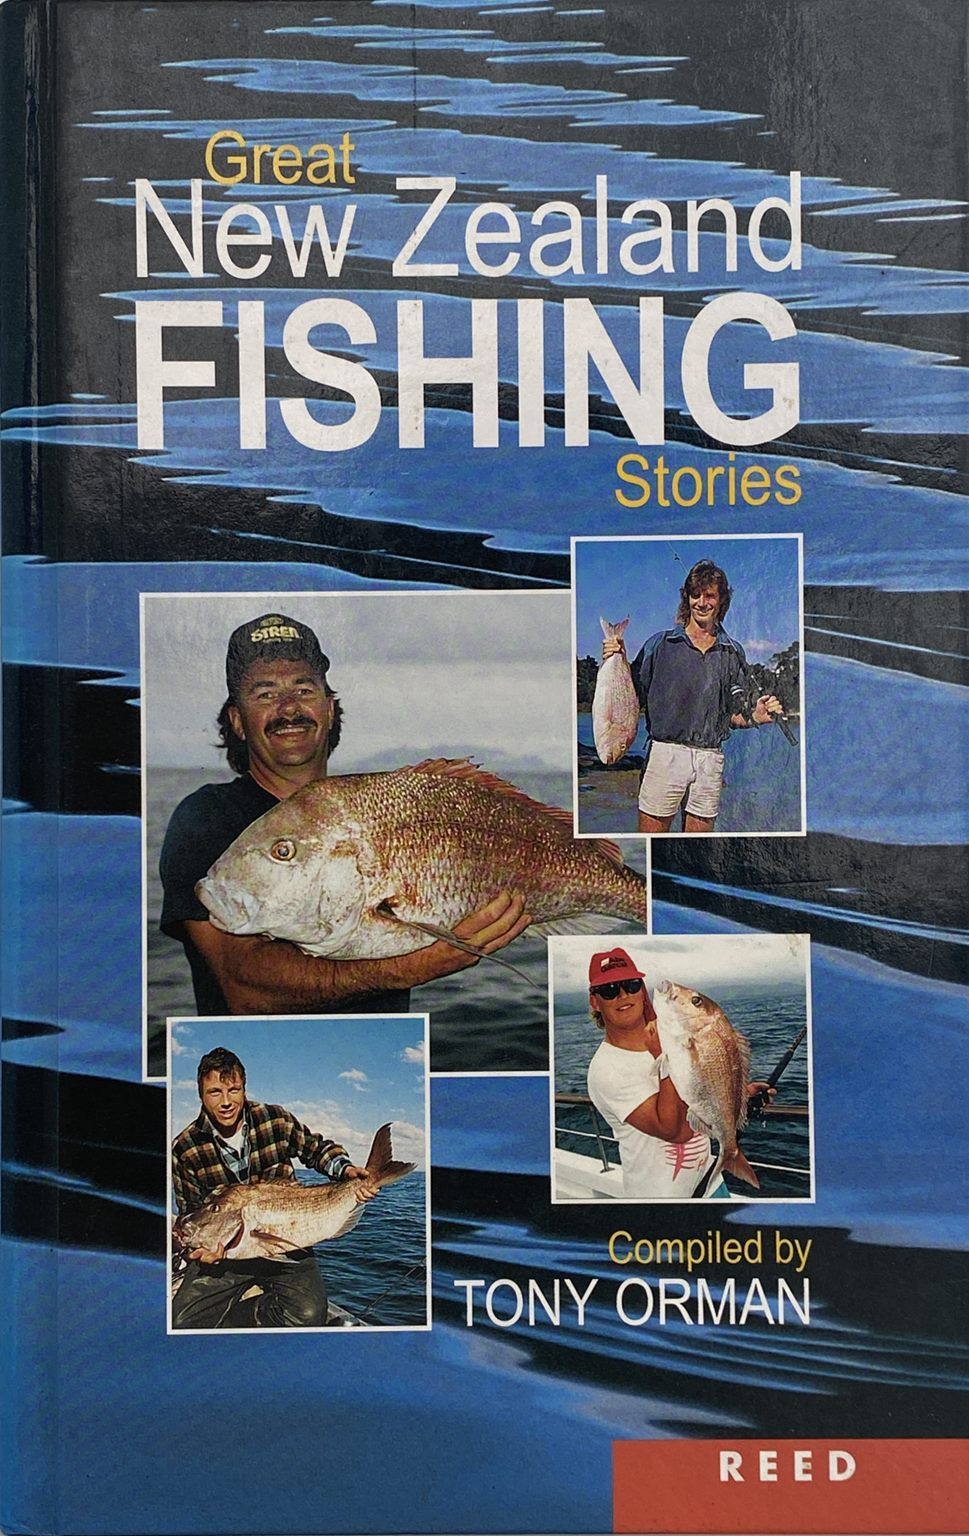 Fishing with My Dad. How the Simple Act of Fishing can…, by Trent Fox